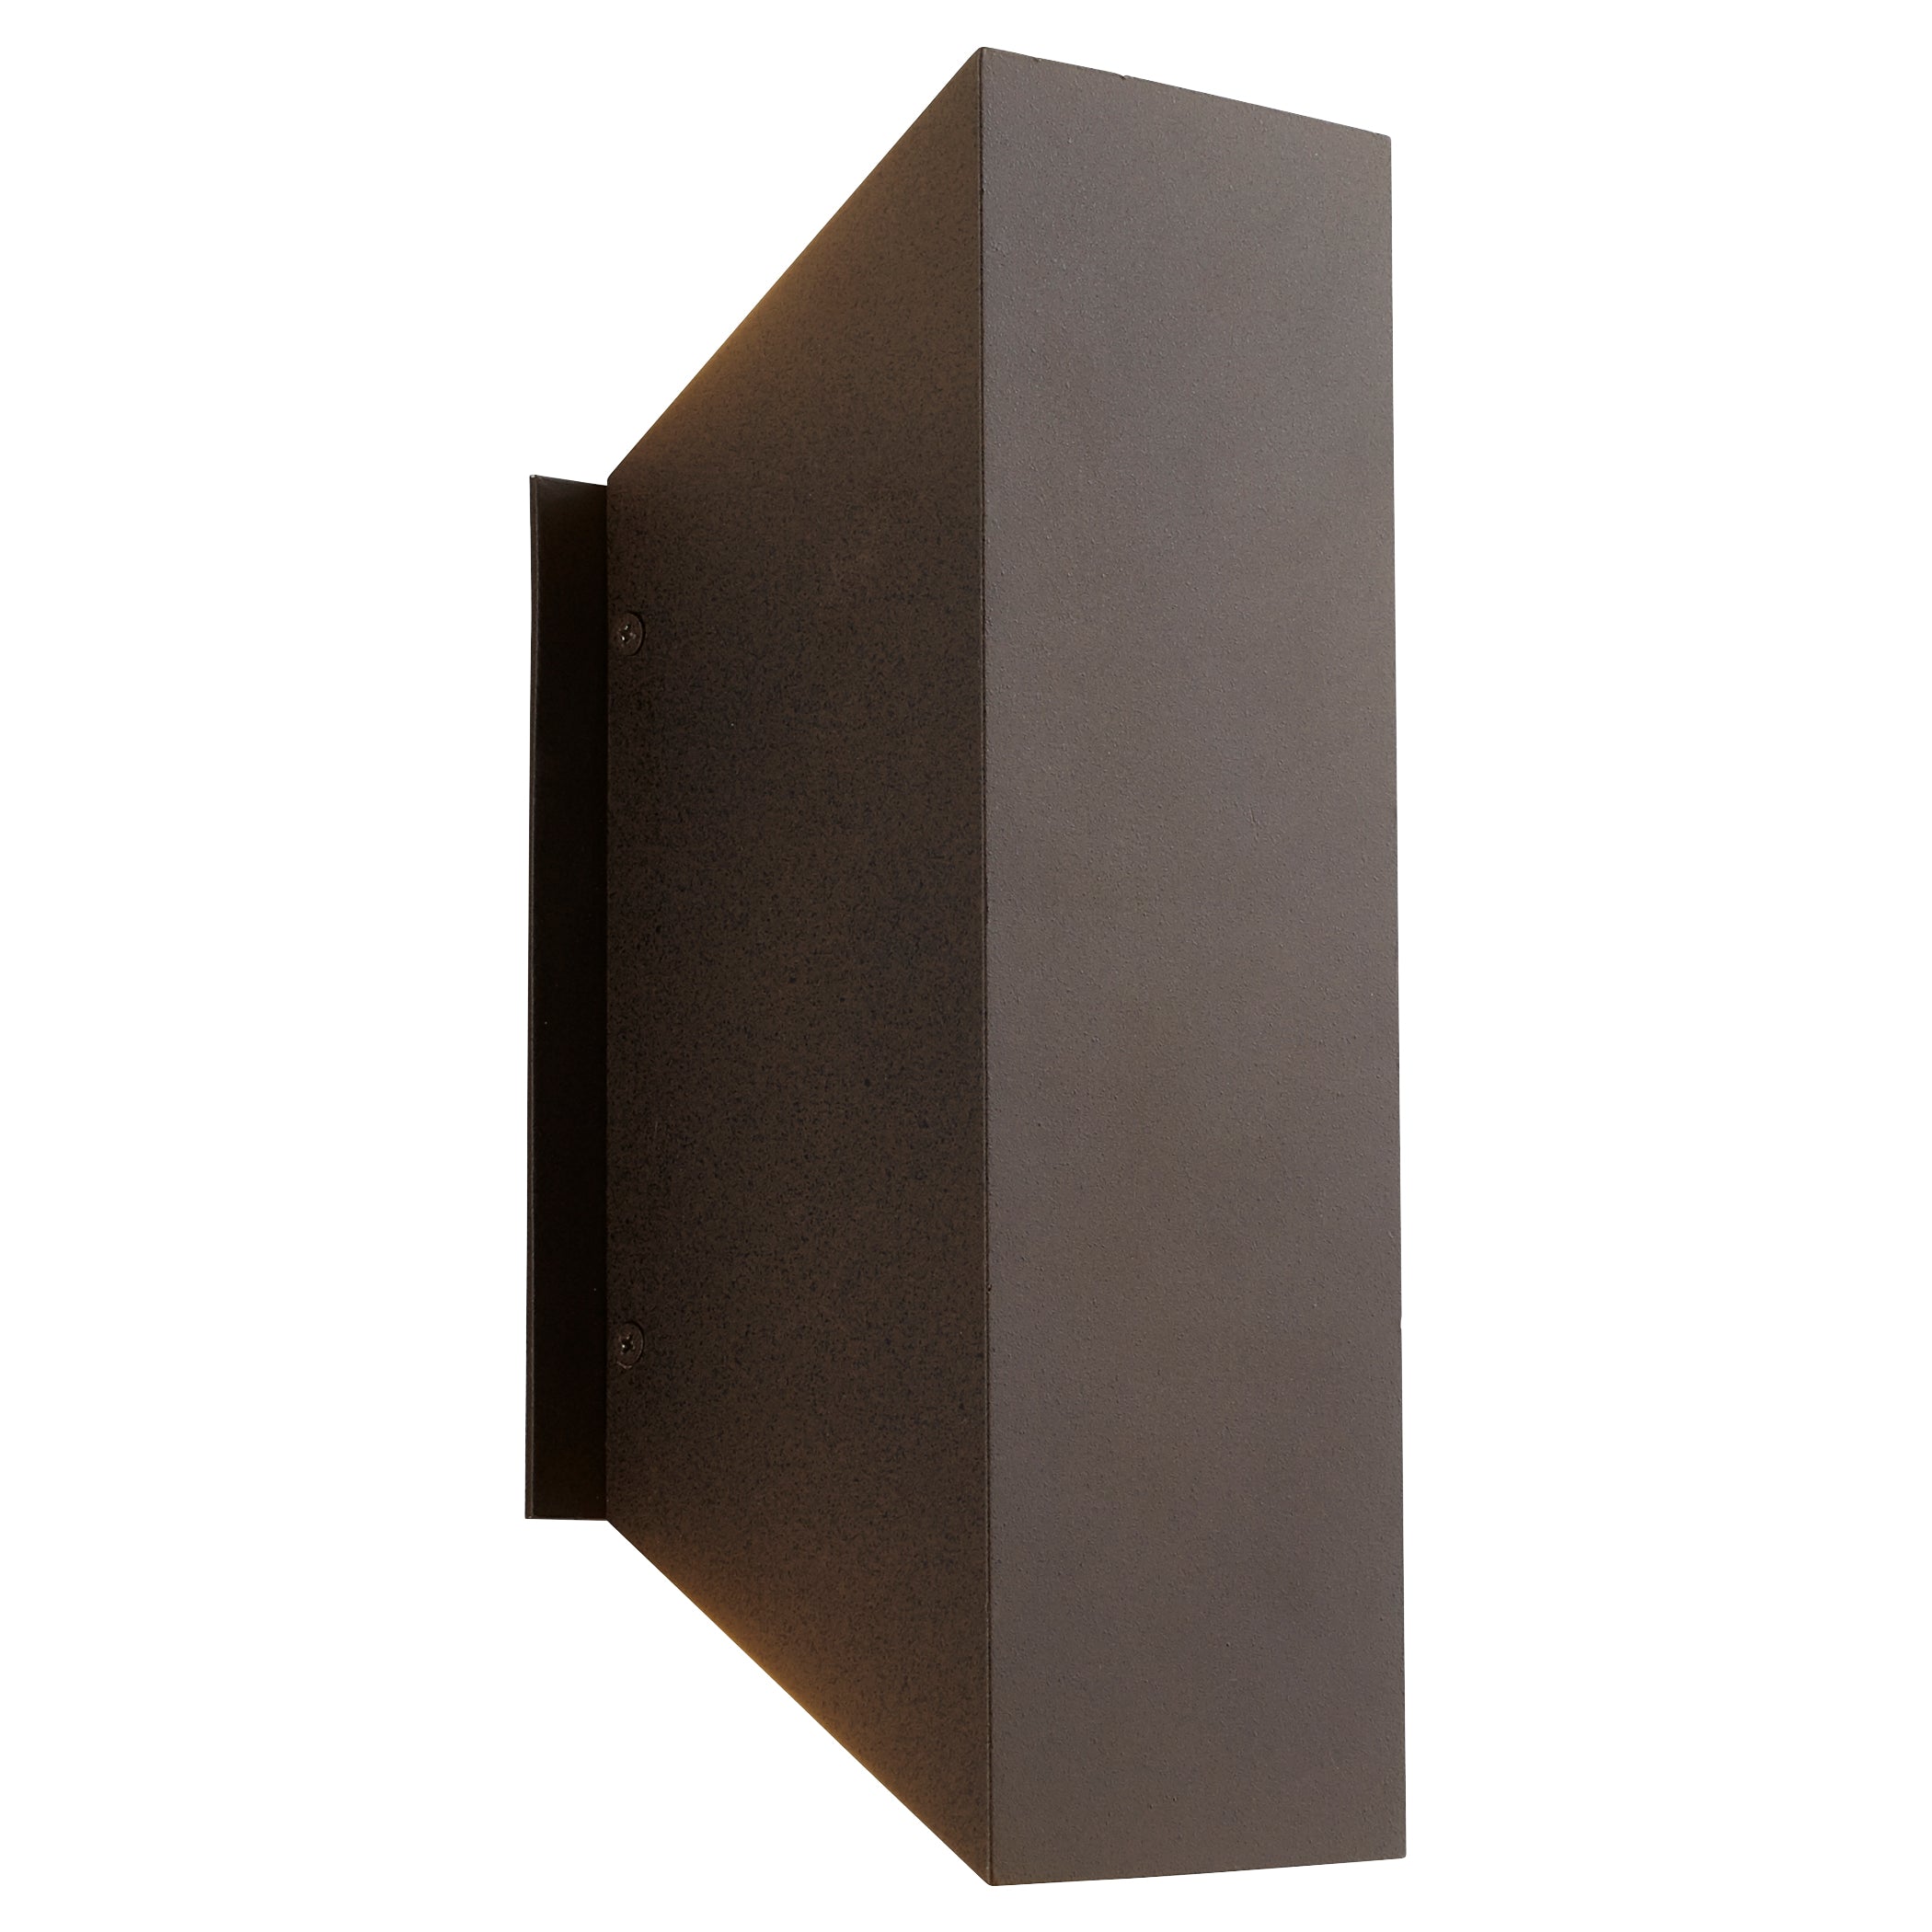 Oxygen Duo 3-702-22 Outdoor Wall Sconce Light - Oiled Bronze